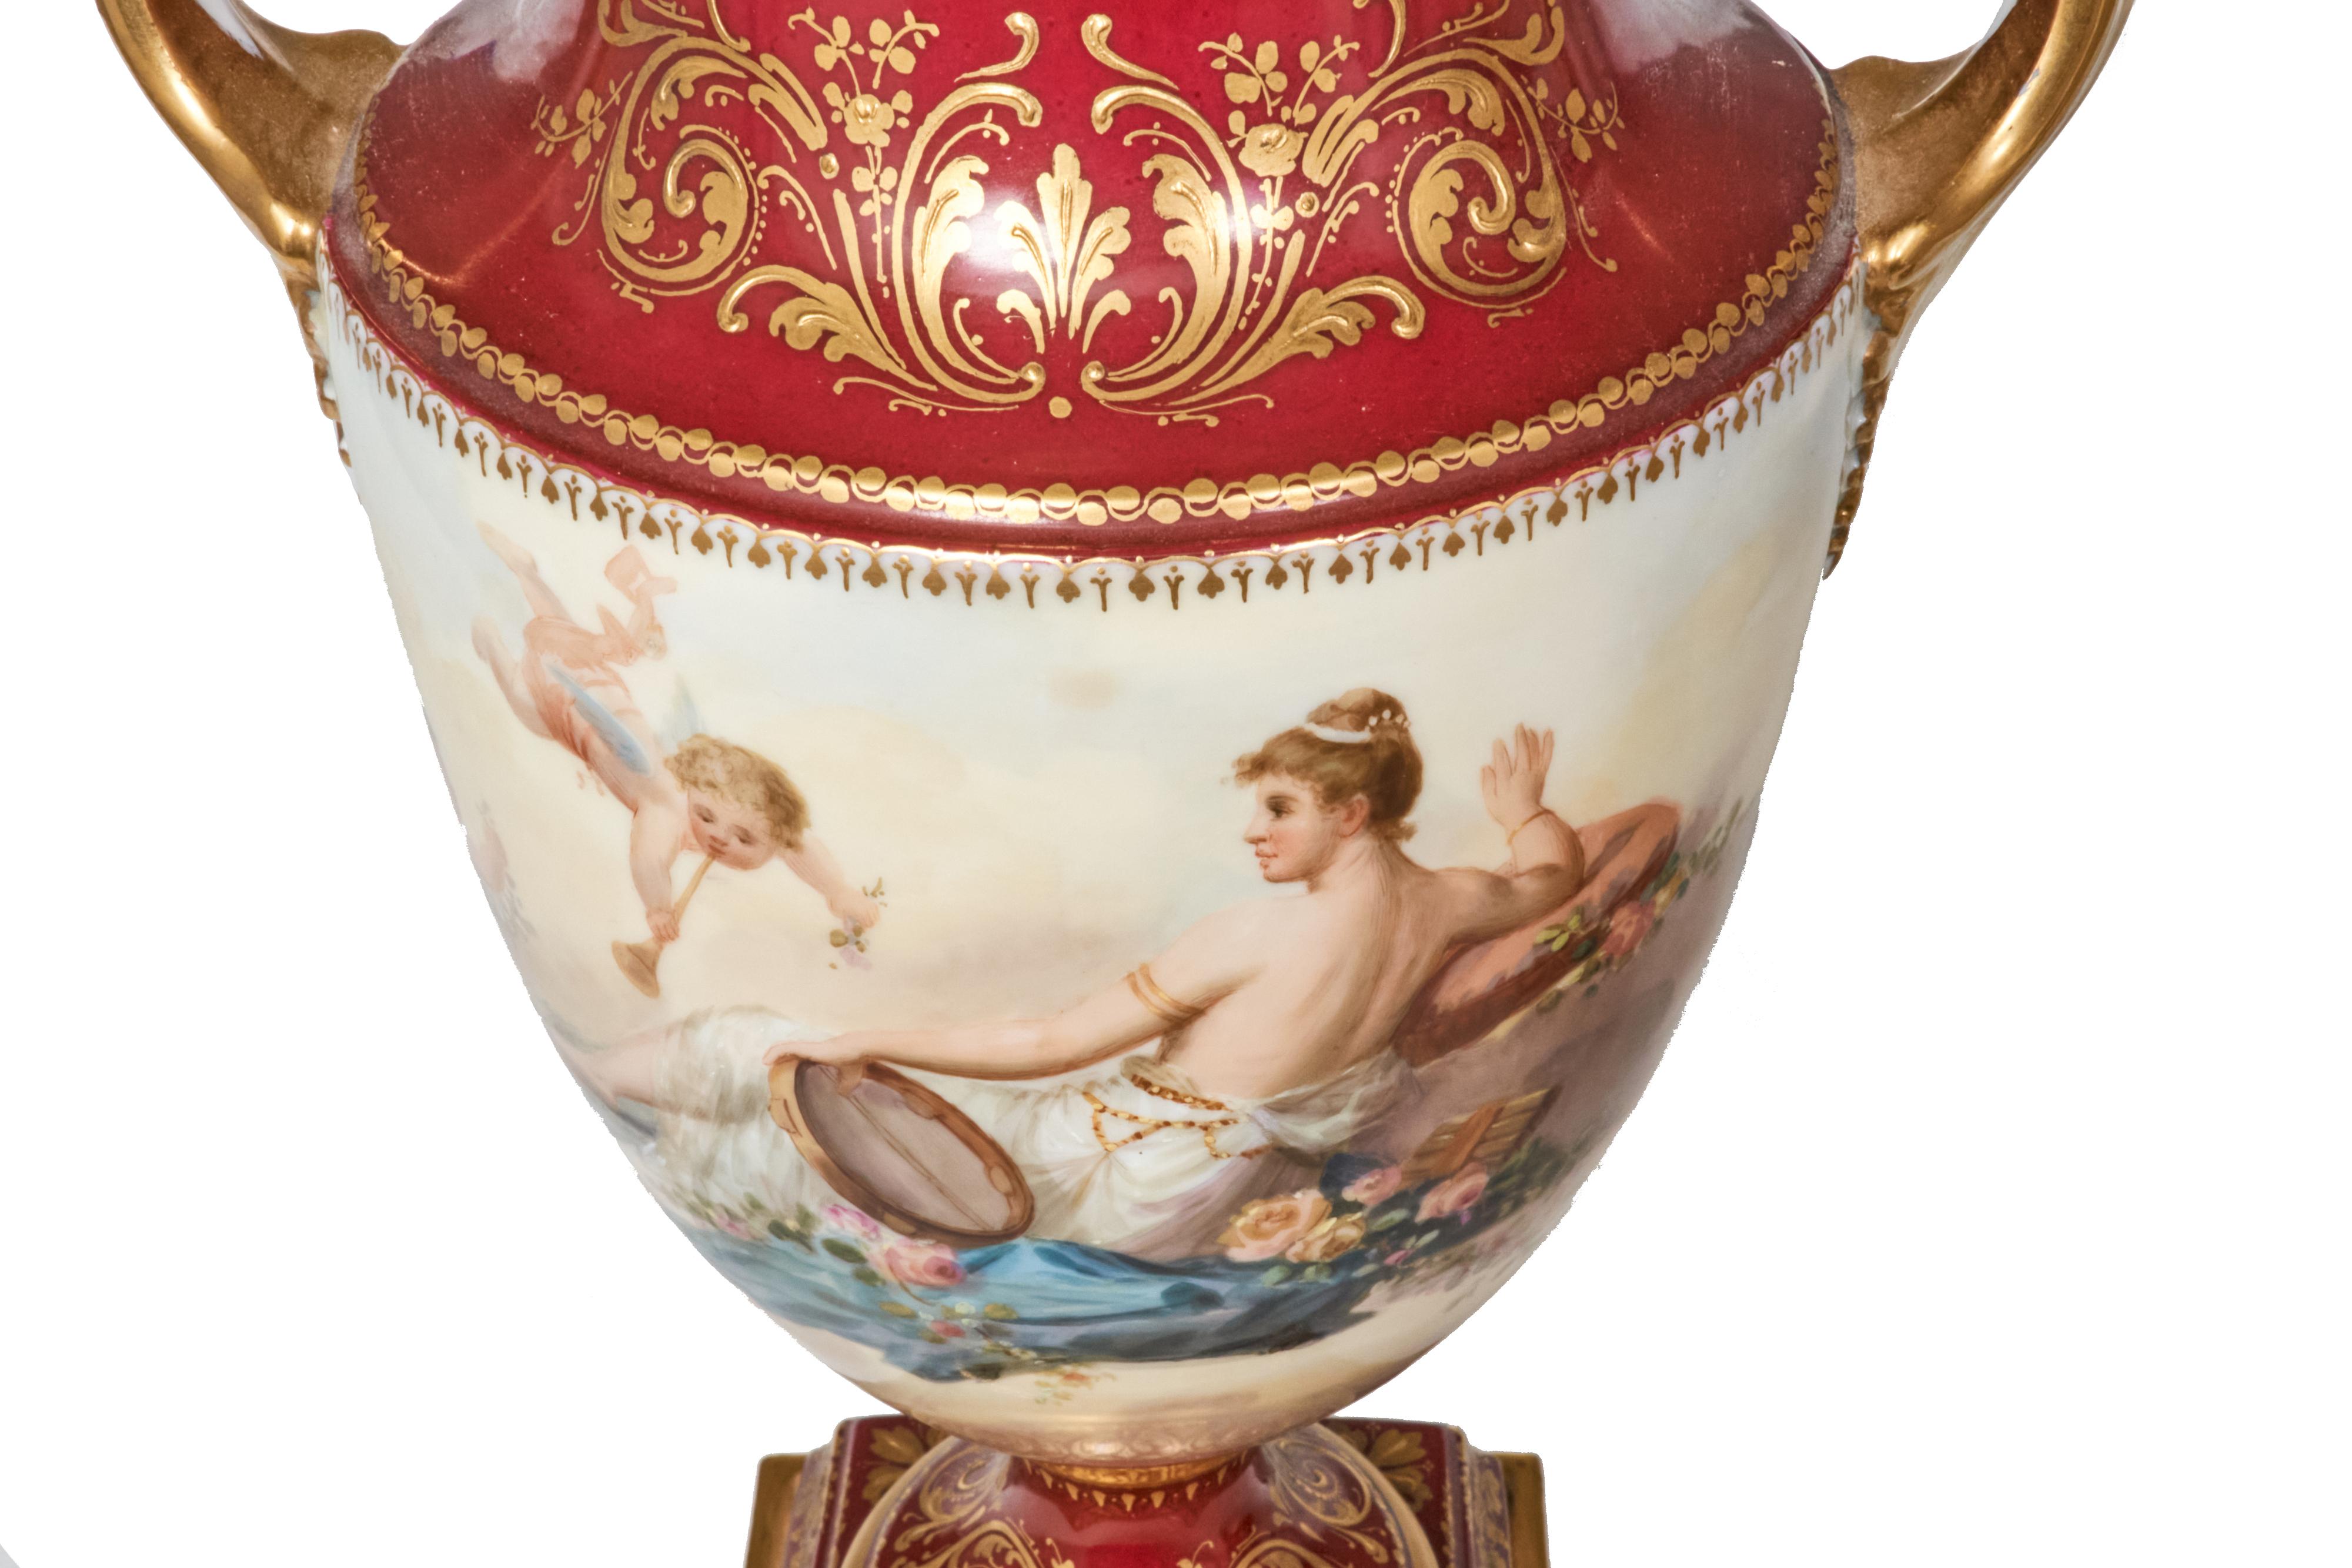 Exquisite pair of hand painted Royal Vienna urns decorated with cherubs and scantily clad women. Rich red is complimented by gold decoration and brass raised bases. Each urn has a matching lid and all pieces are in excellent condition without